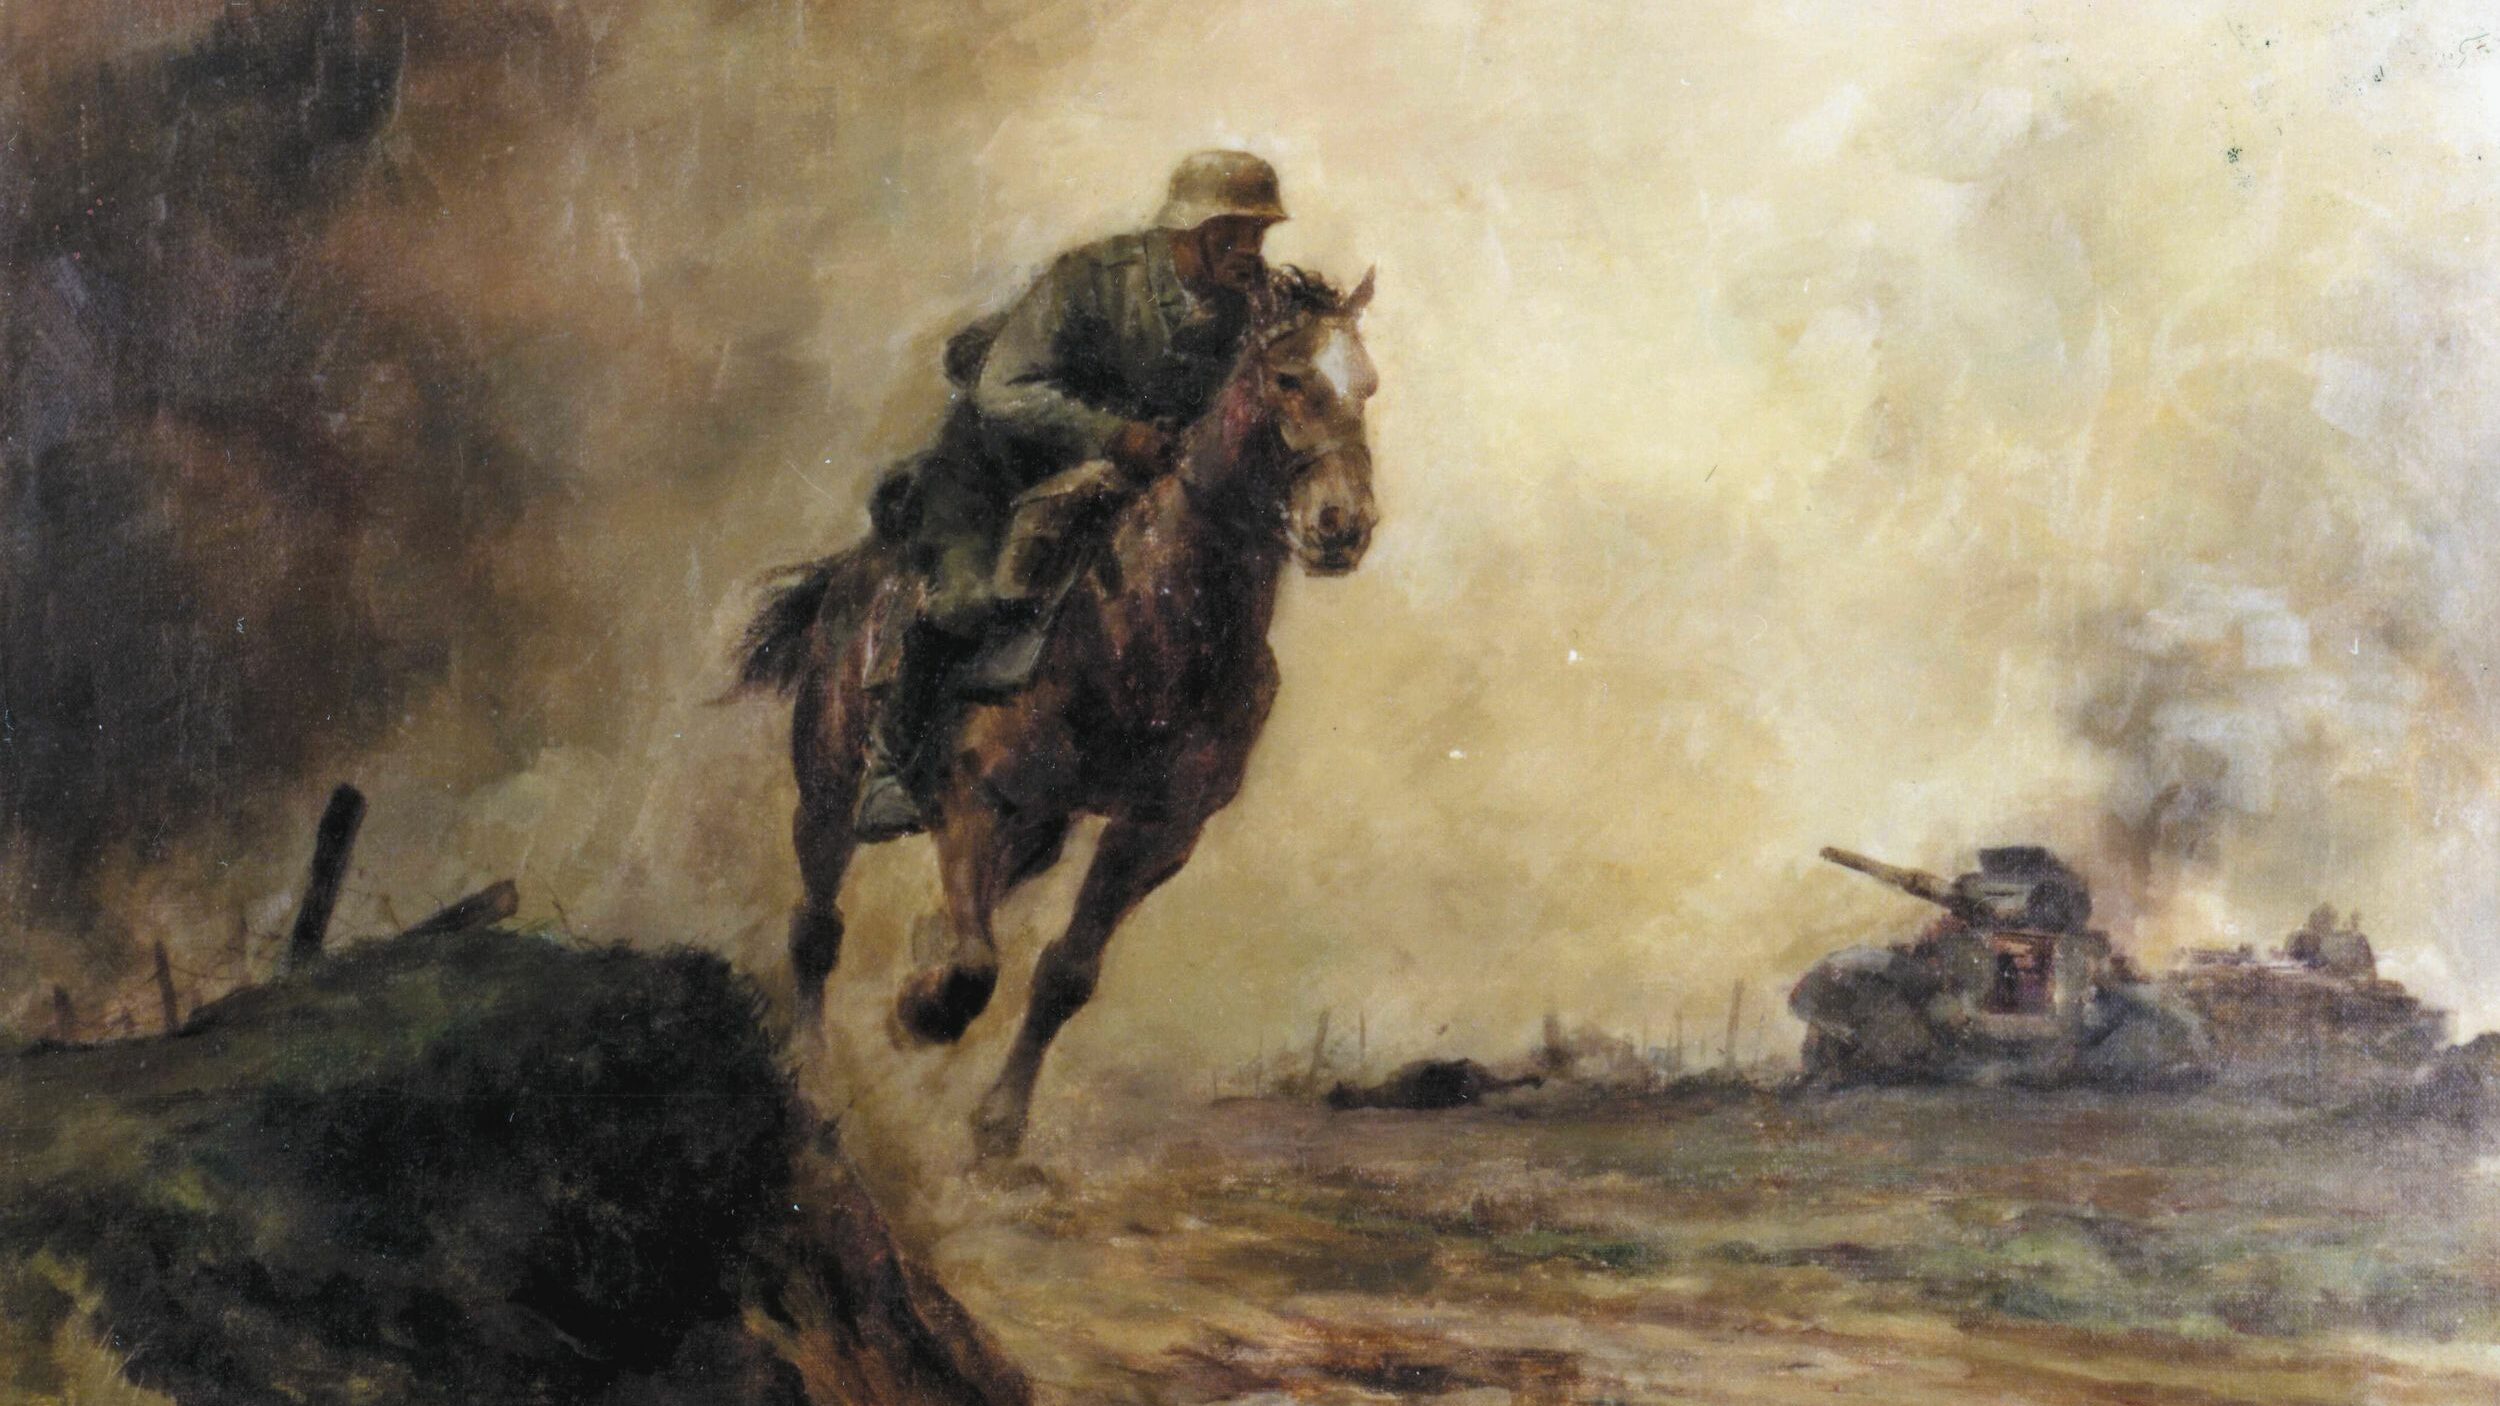 Racing through shellfire on the Eastern Front in 1944, a German courier on horseback attempts to deliver a message.